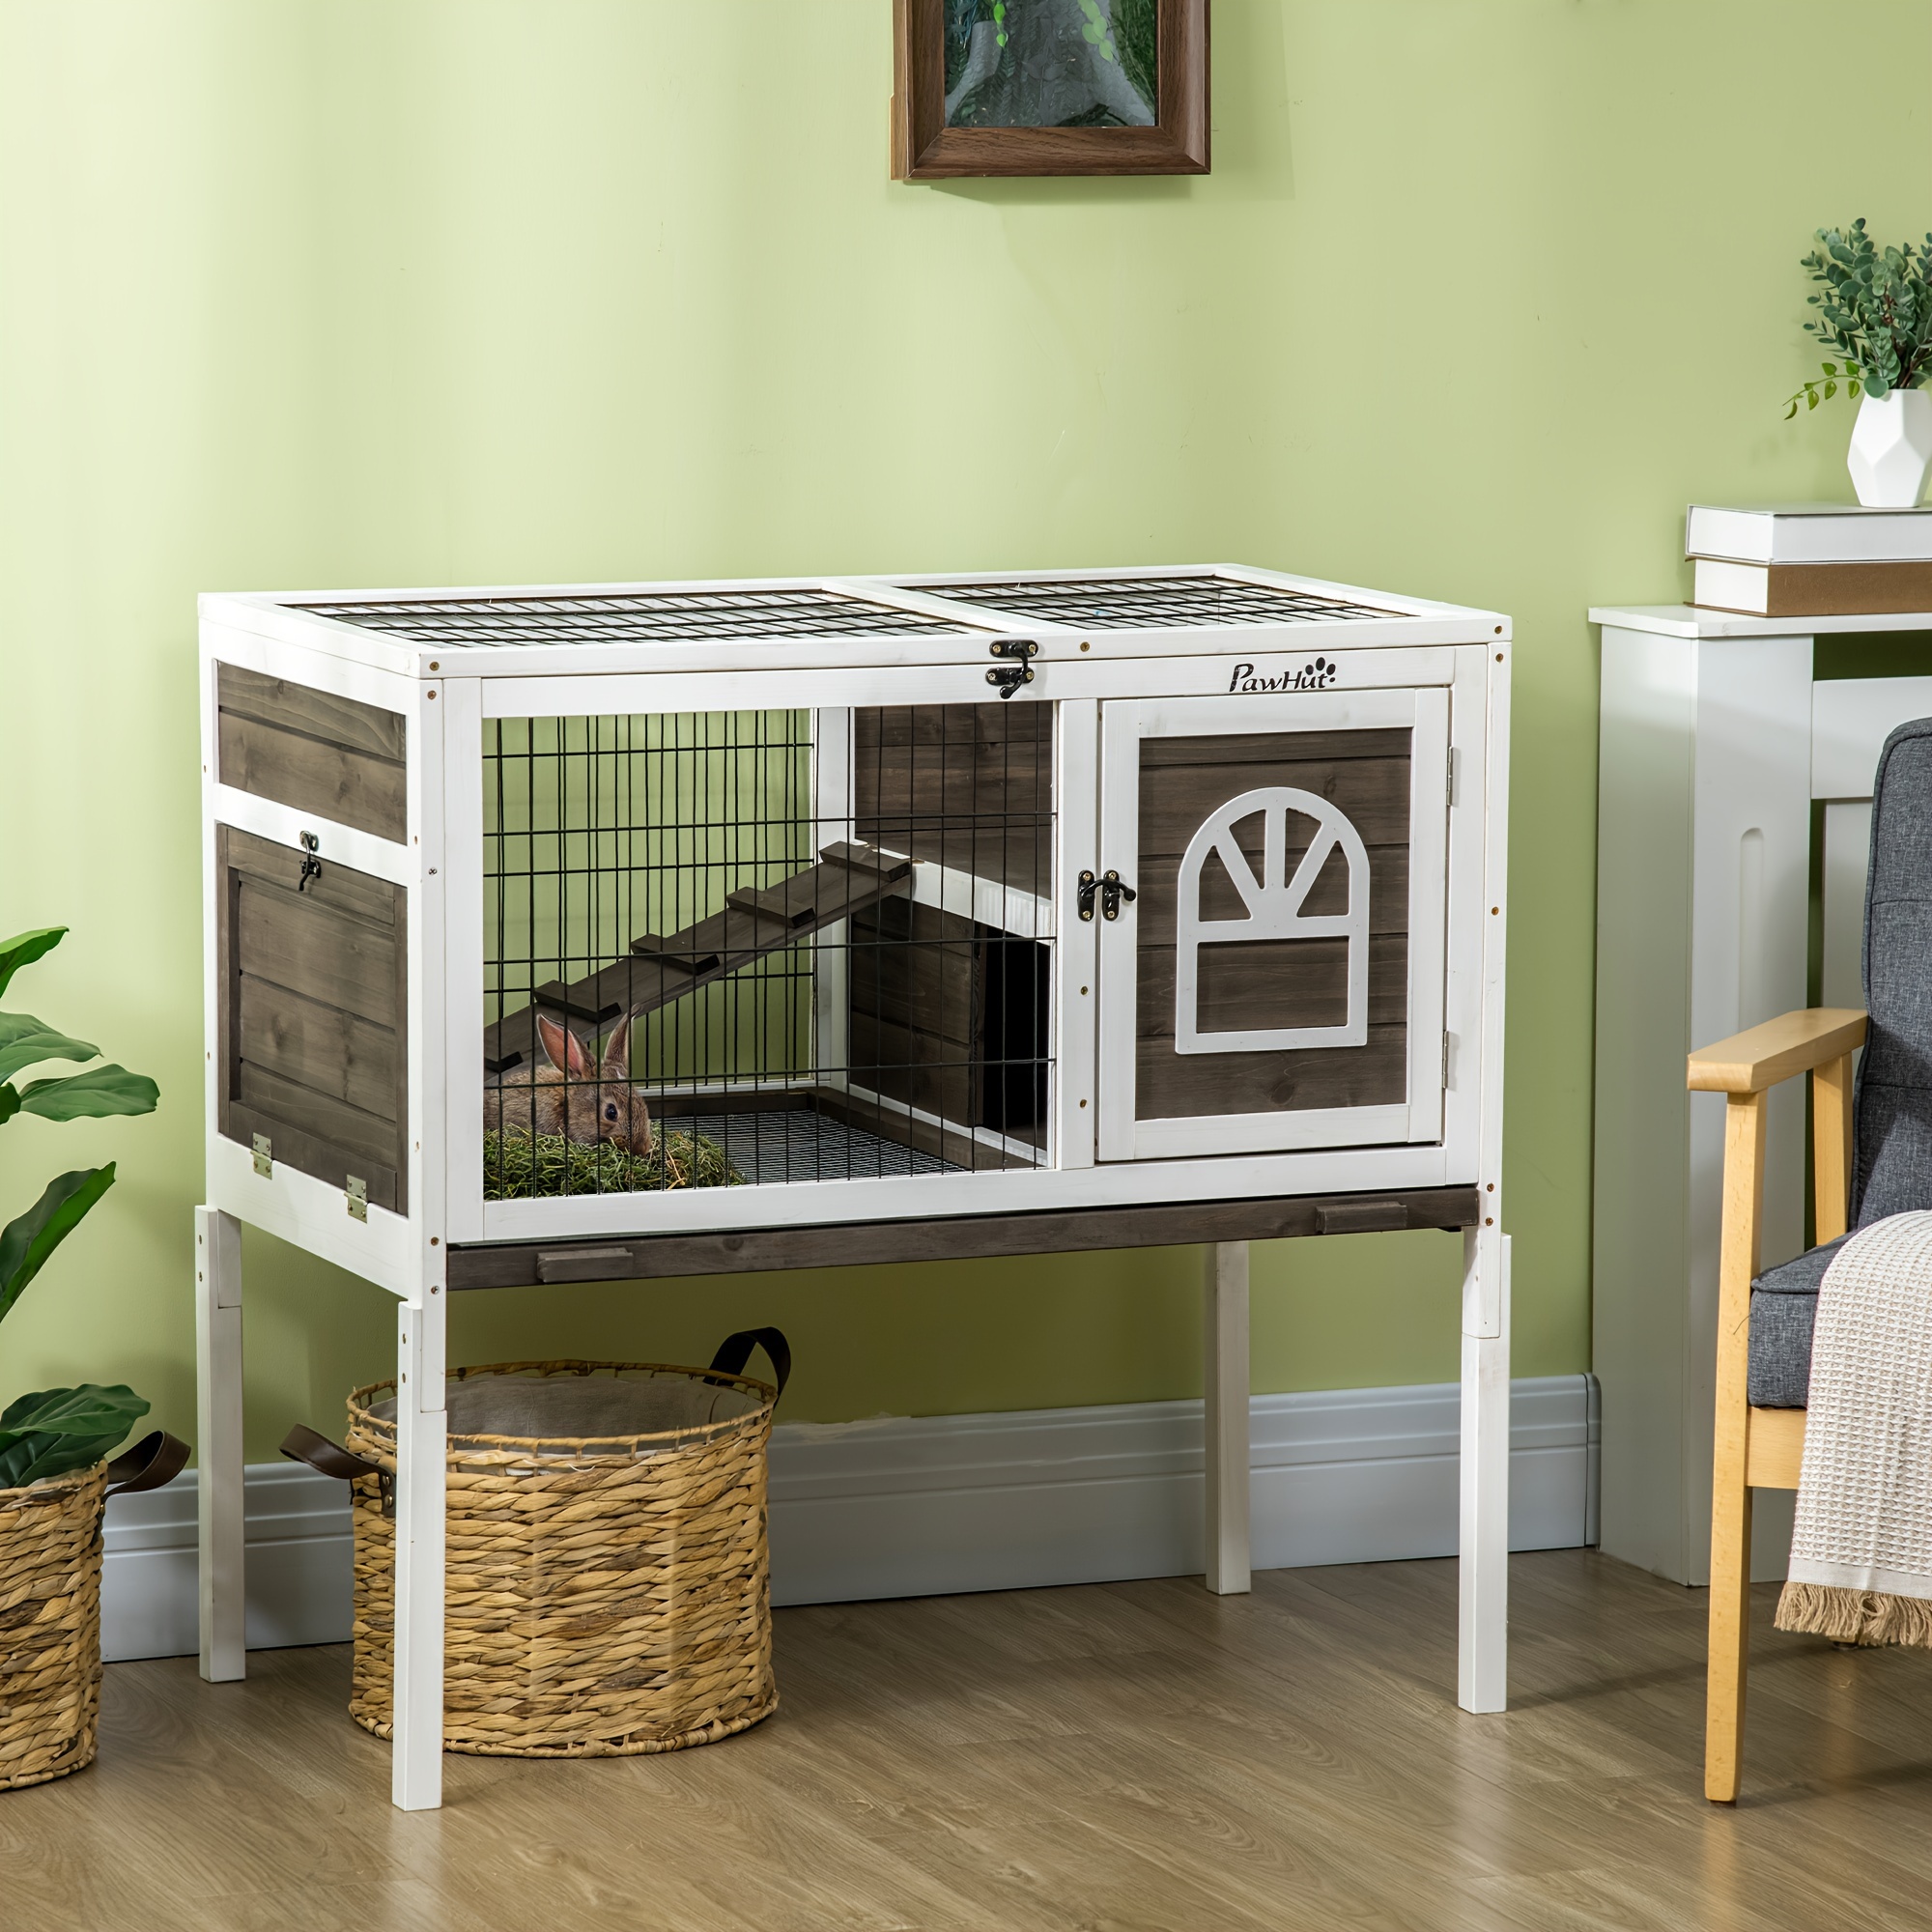 wooden rabbit hutch indoor elevated small animal cage with run ladder lockable doors and removable tray